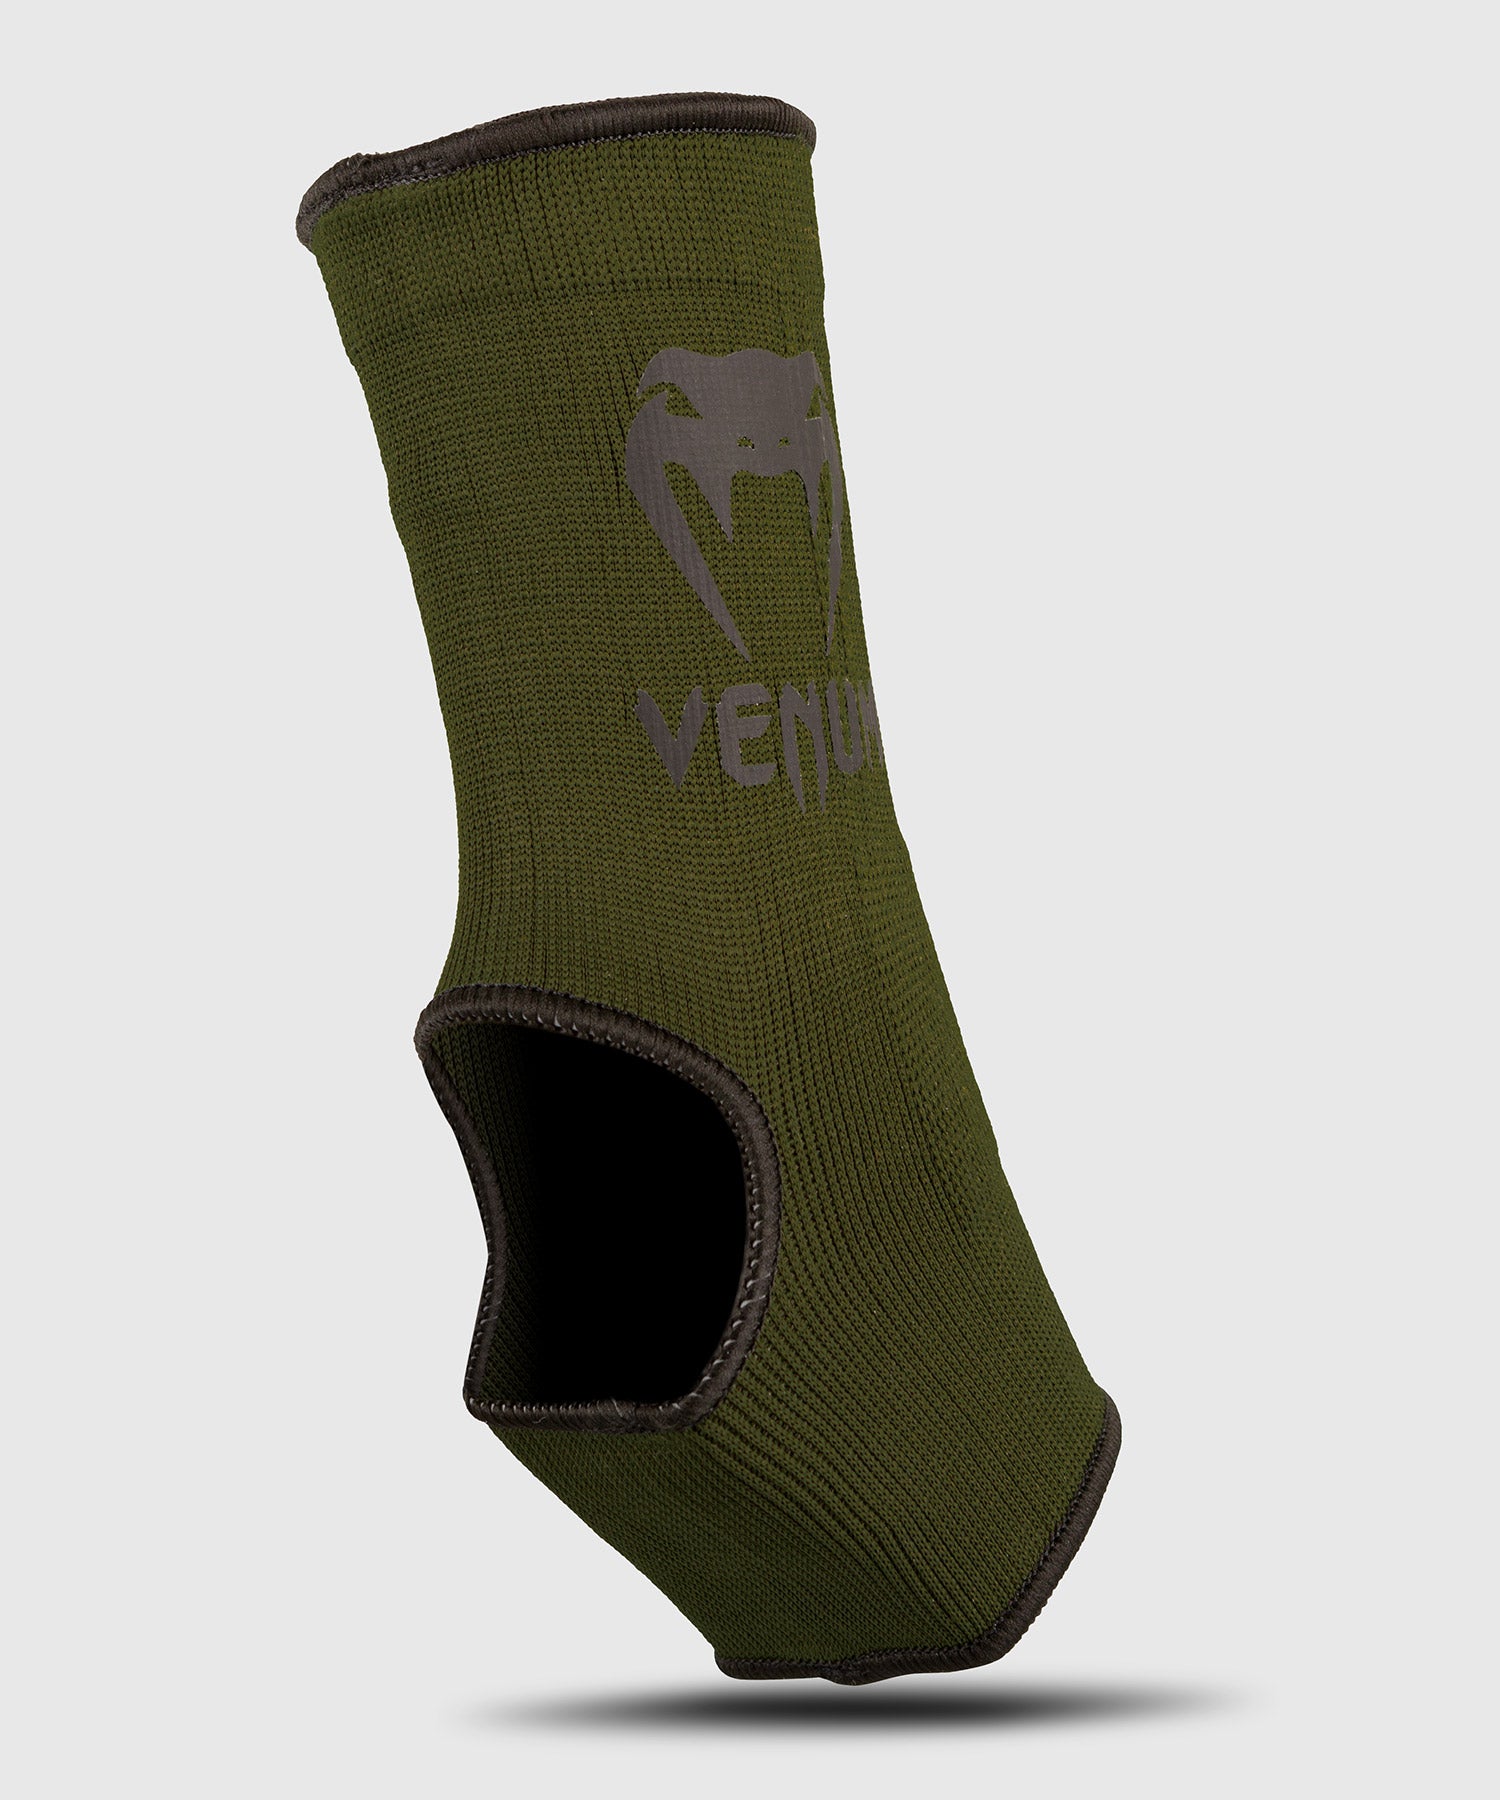 Kontact Ankle Support Guard - Venum